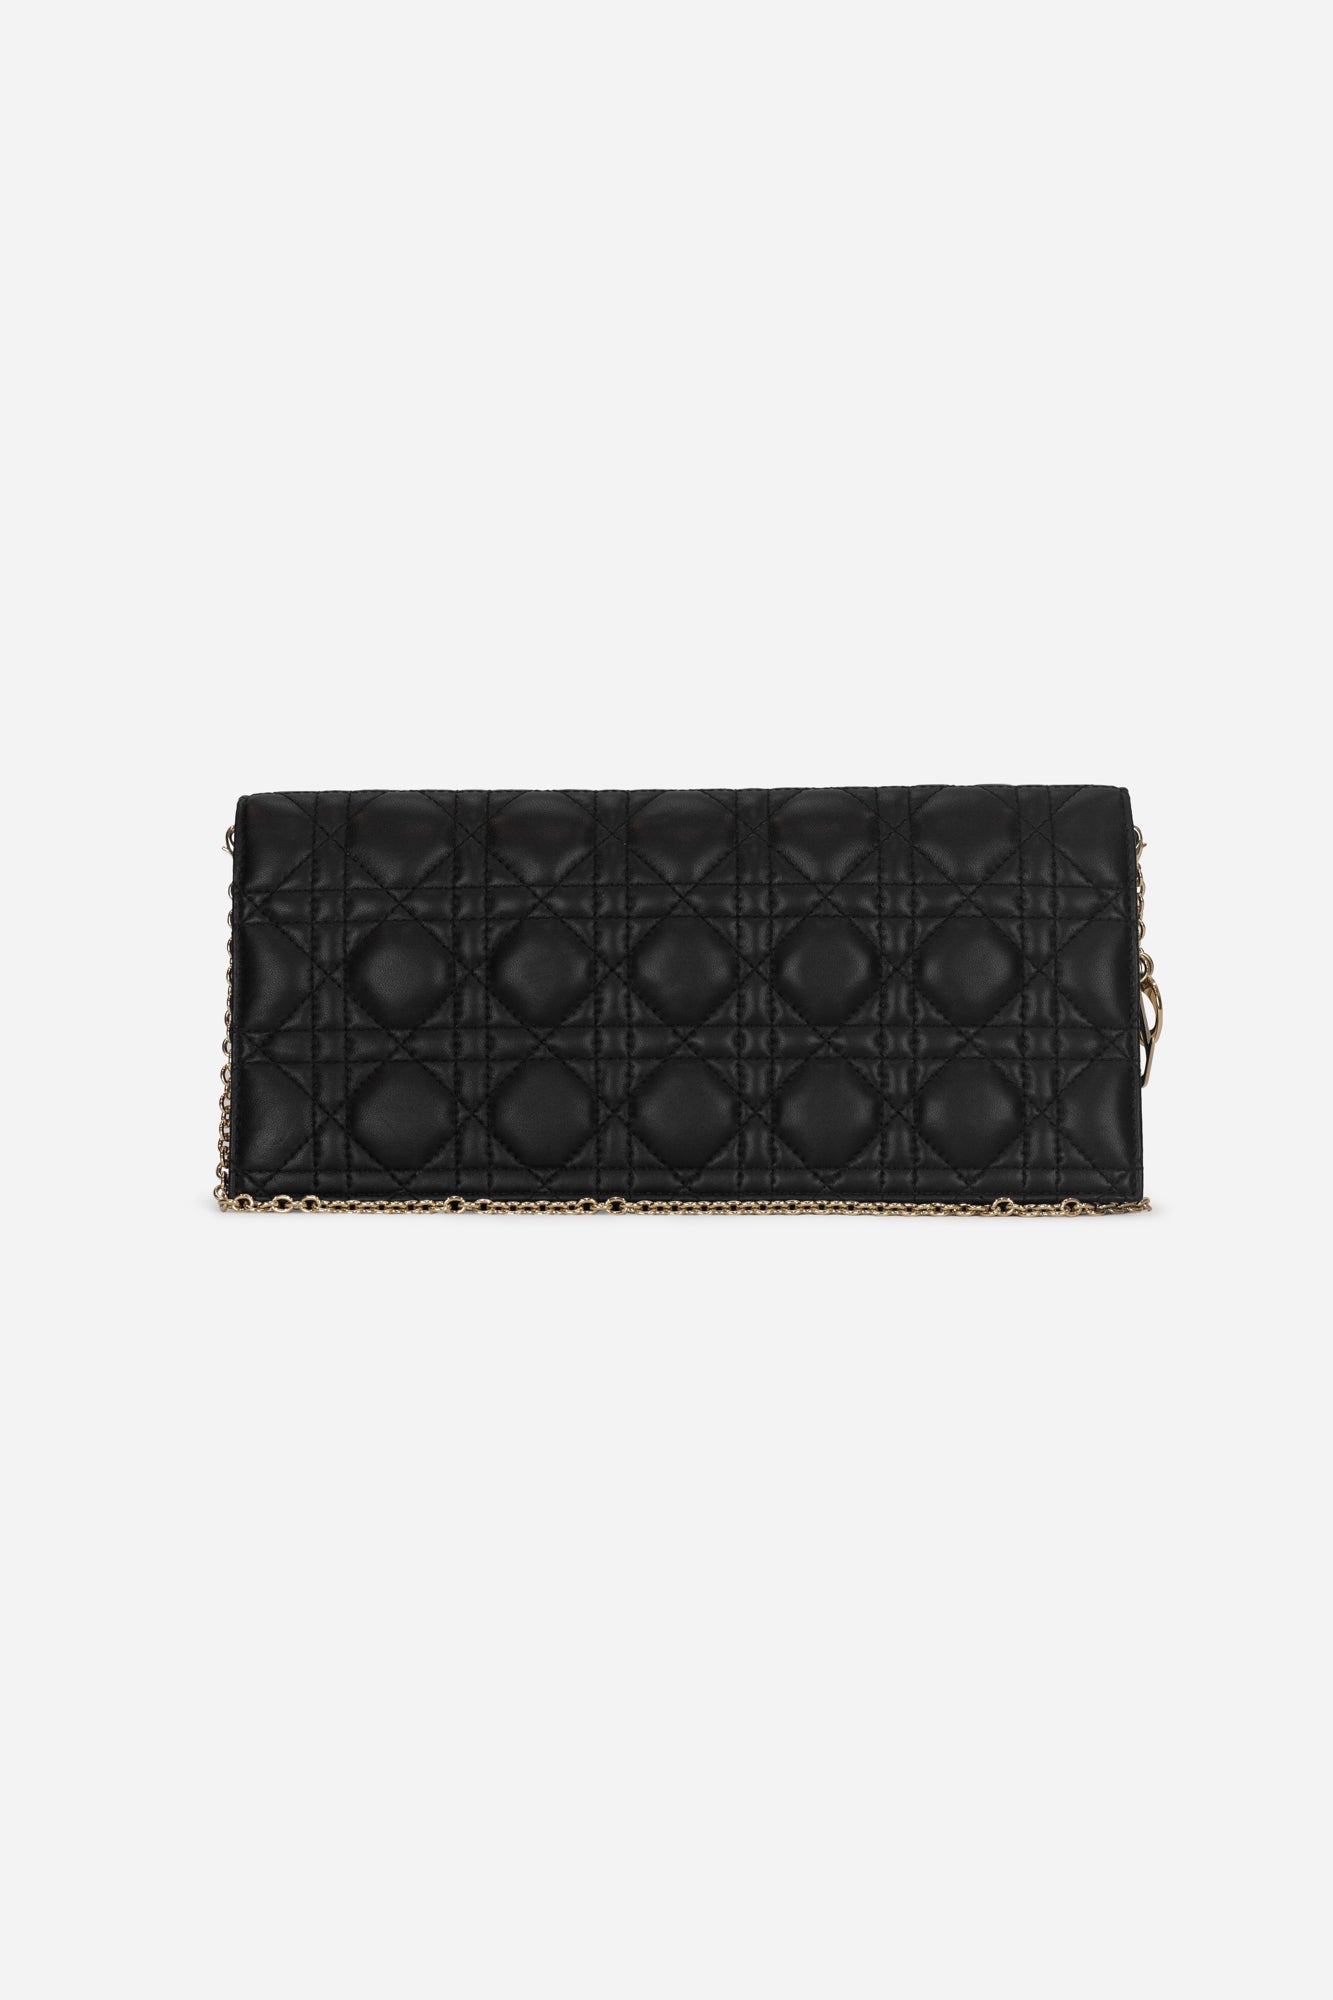 Lady Dior Cannage Black Lambskin Wallet on Chain